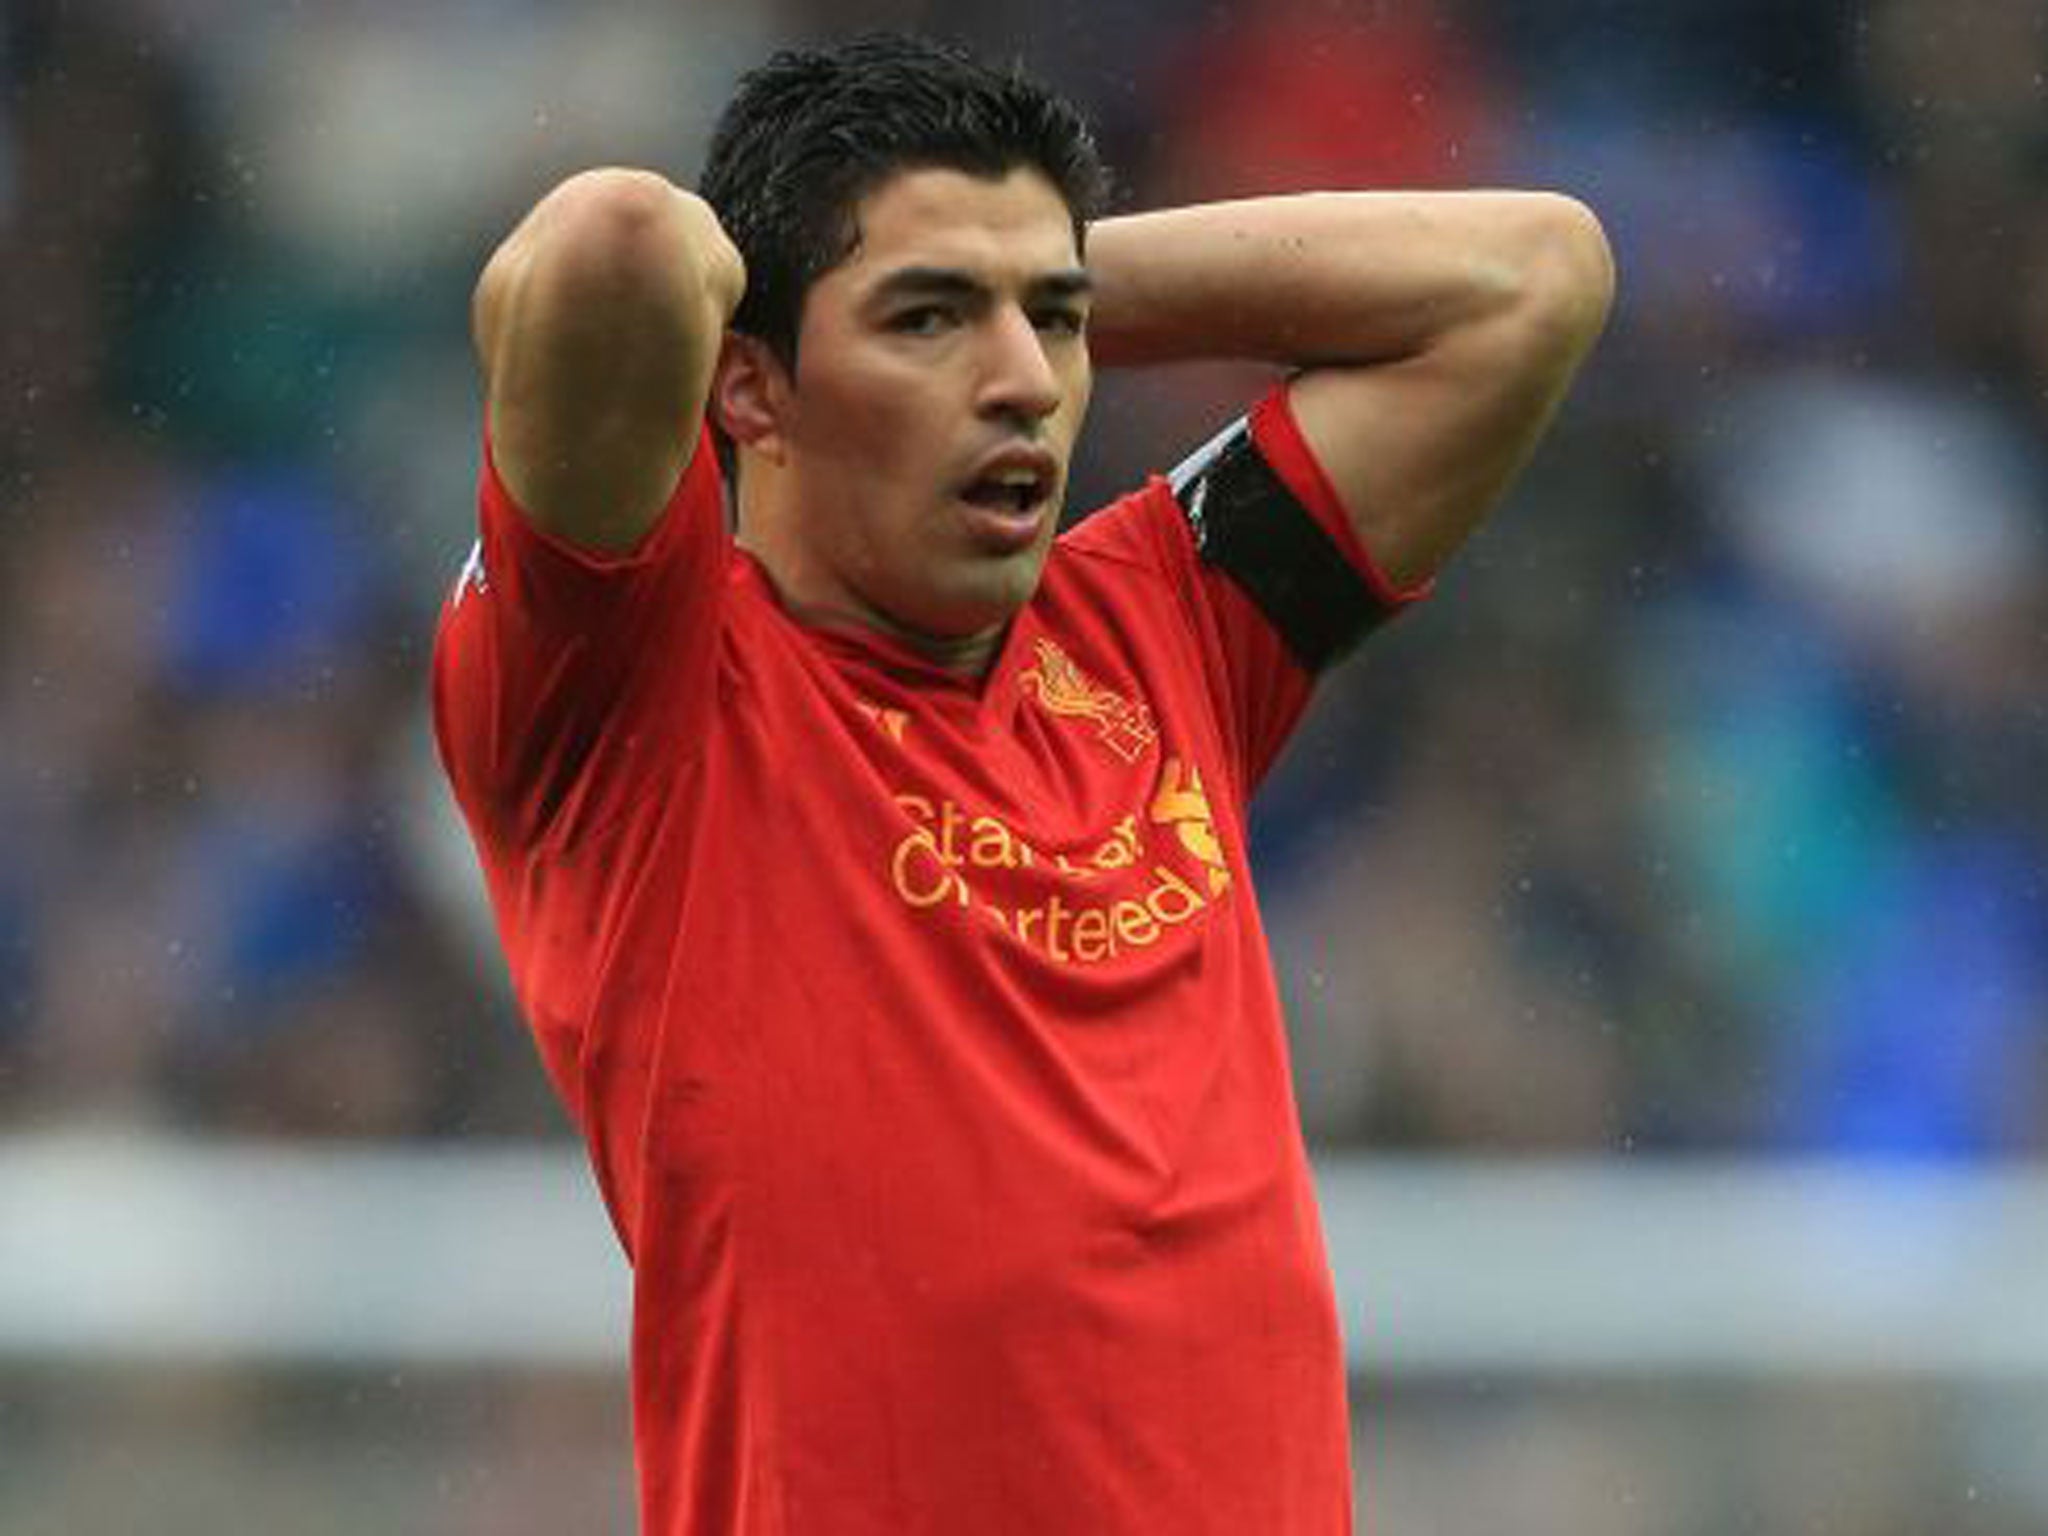 Luis Suarez will not play for Liverpool again until October